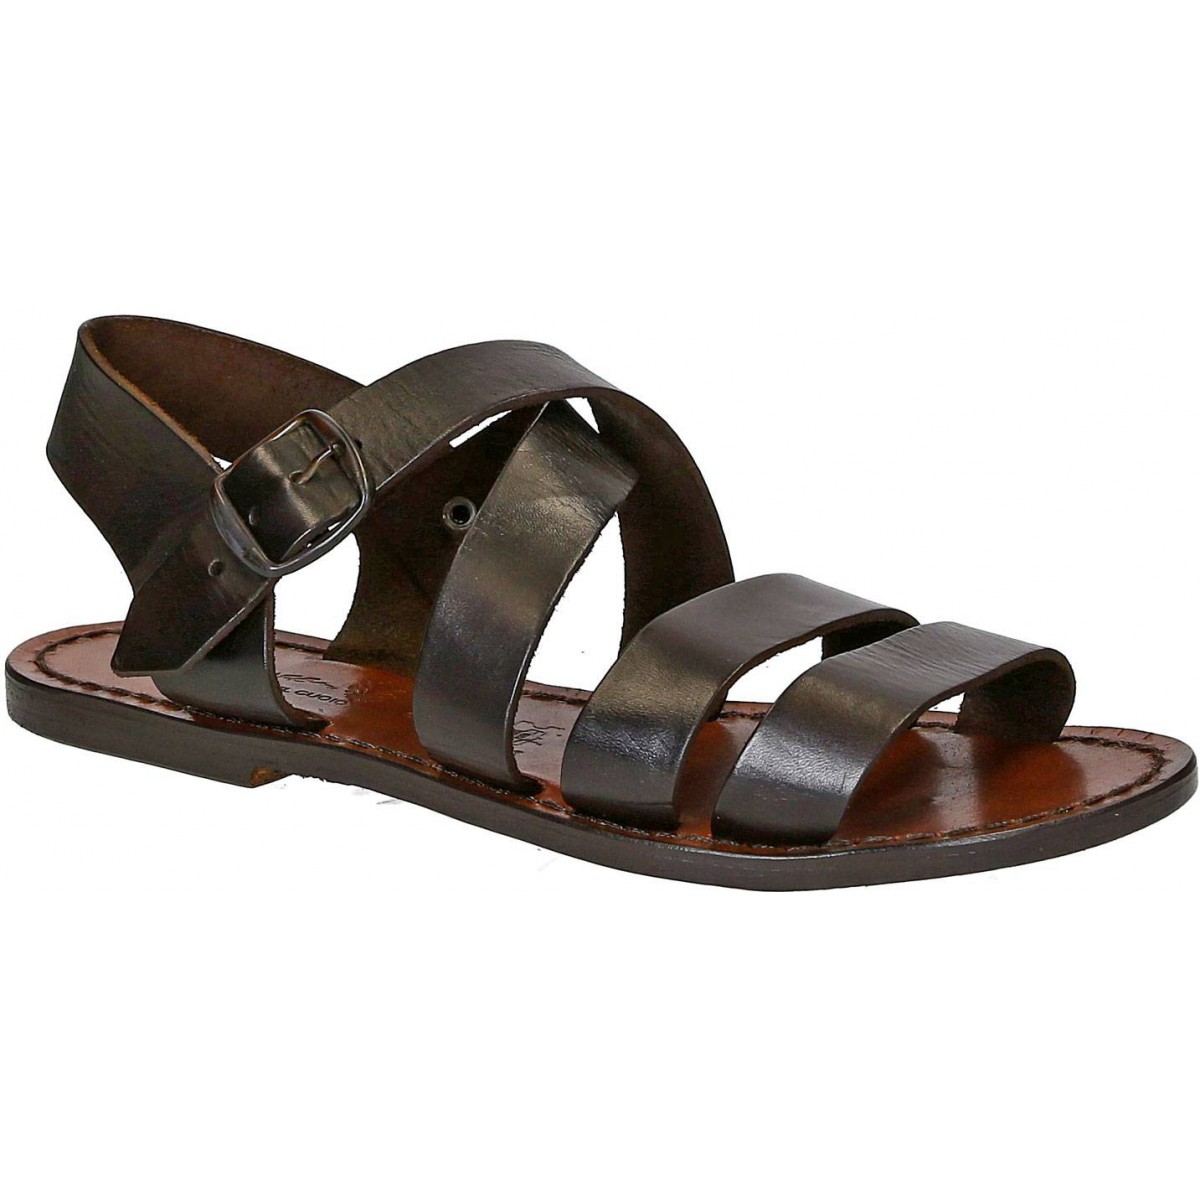 leather sandals women's sandals leather handmade leather sandals real leather made in italy